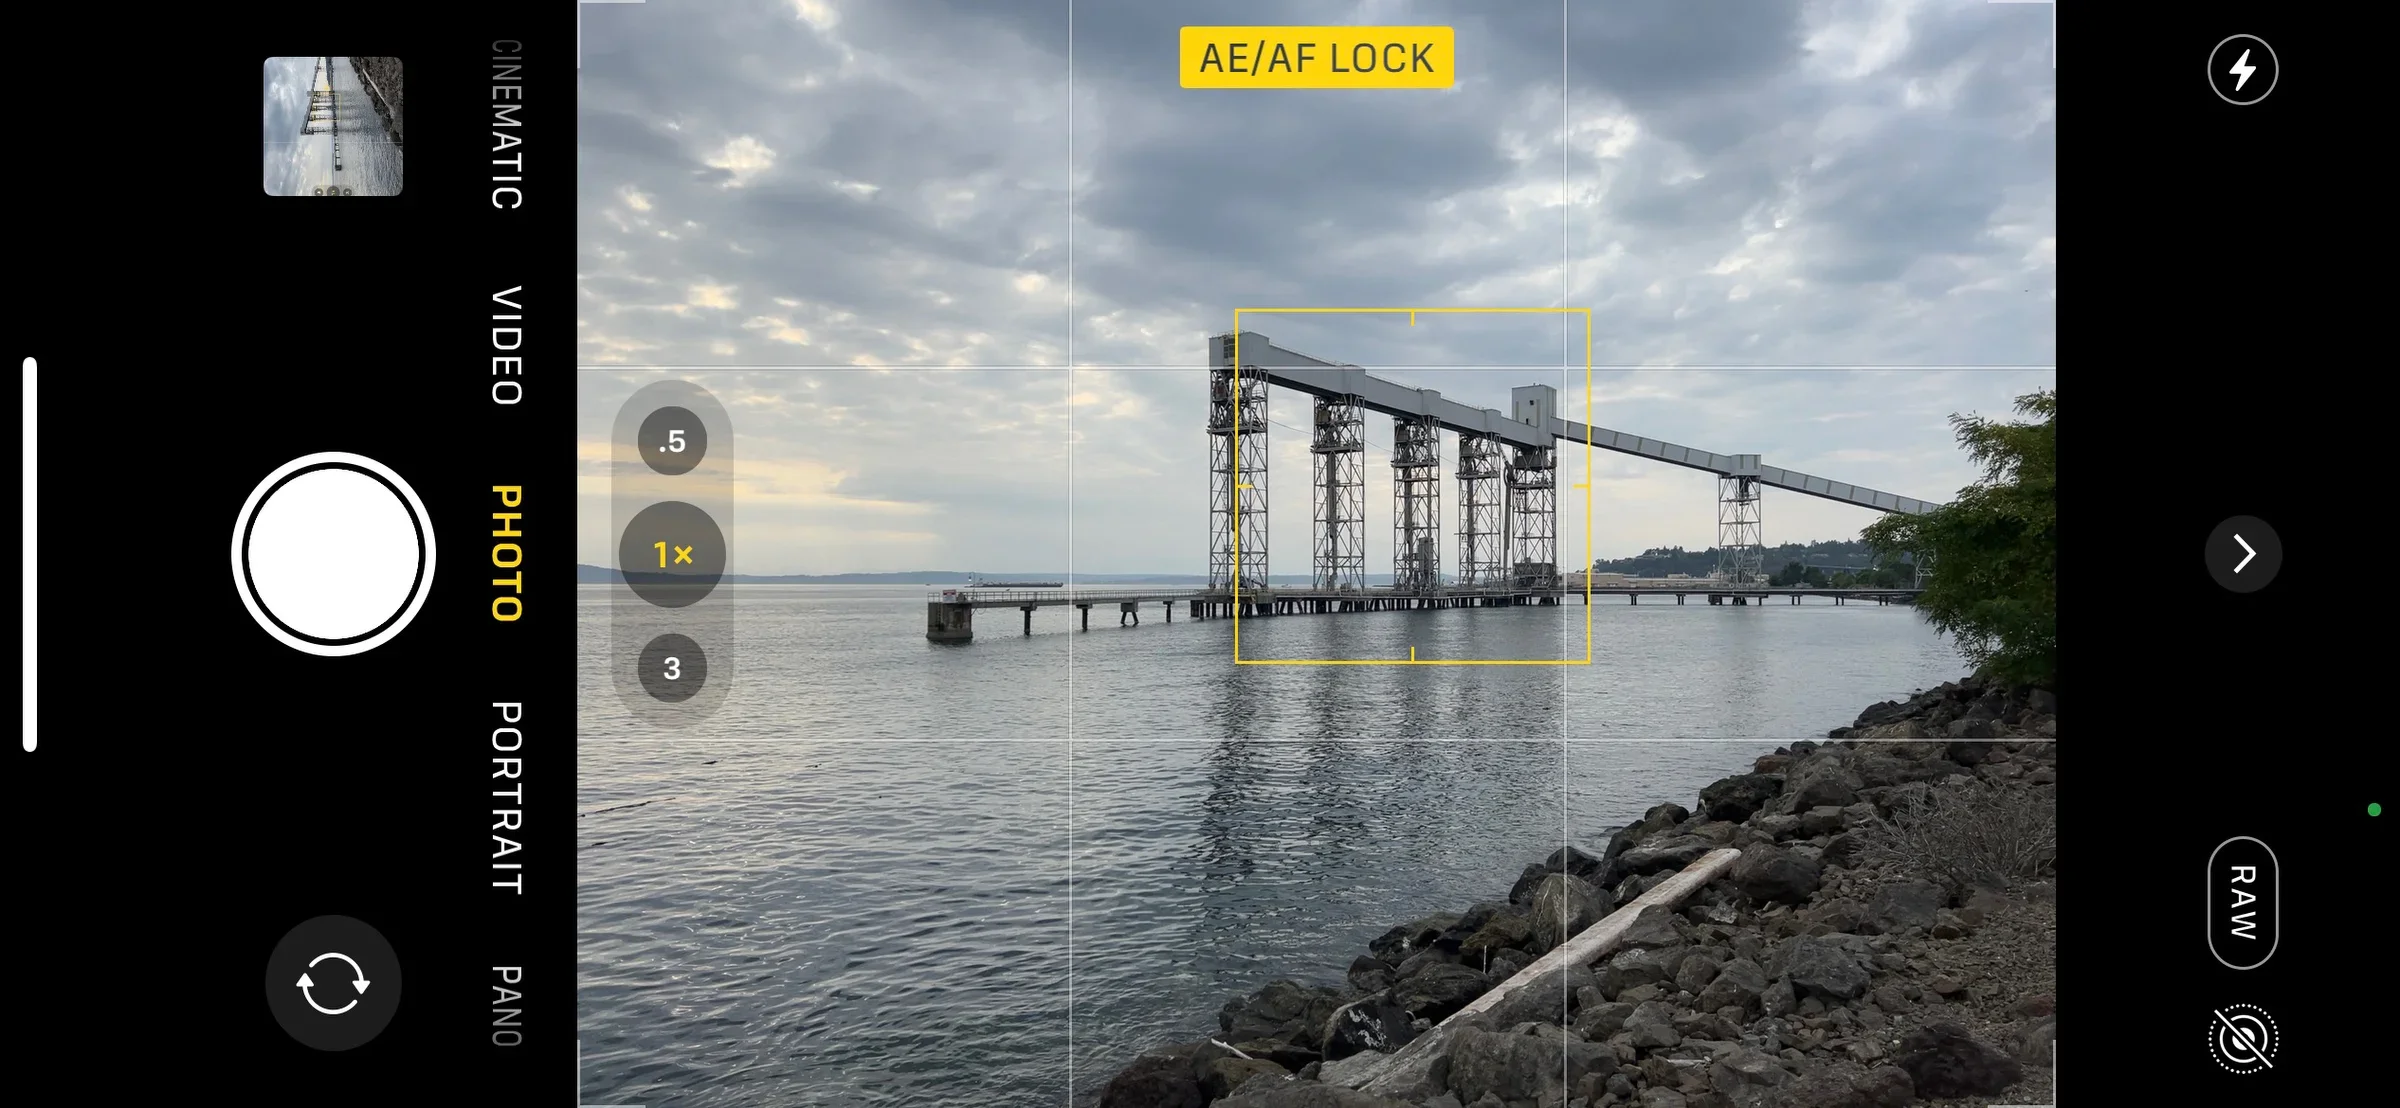 A smartphone camera has cool hidden features - here's how to find them